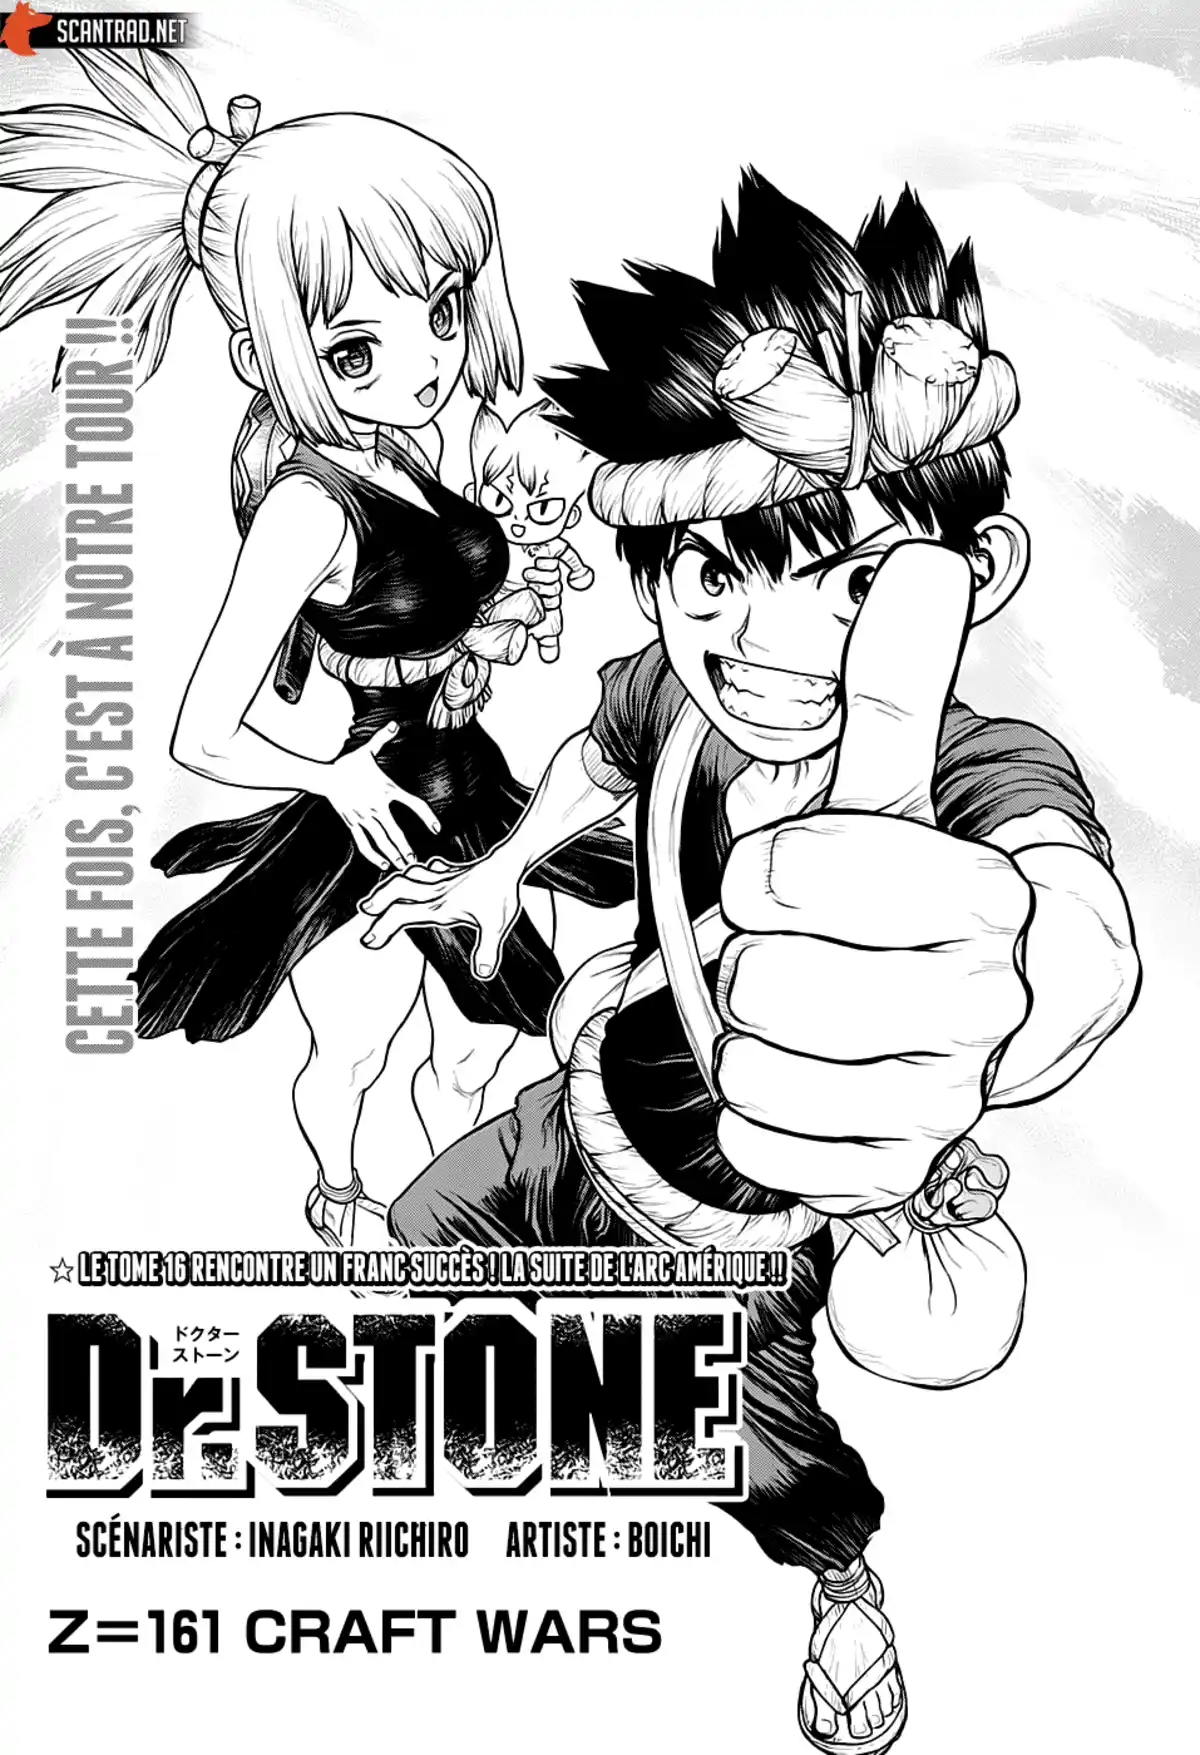 Dr. STONE Volume 19 page 1